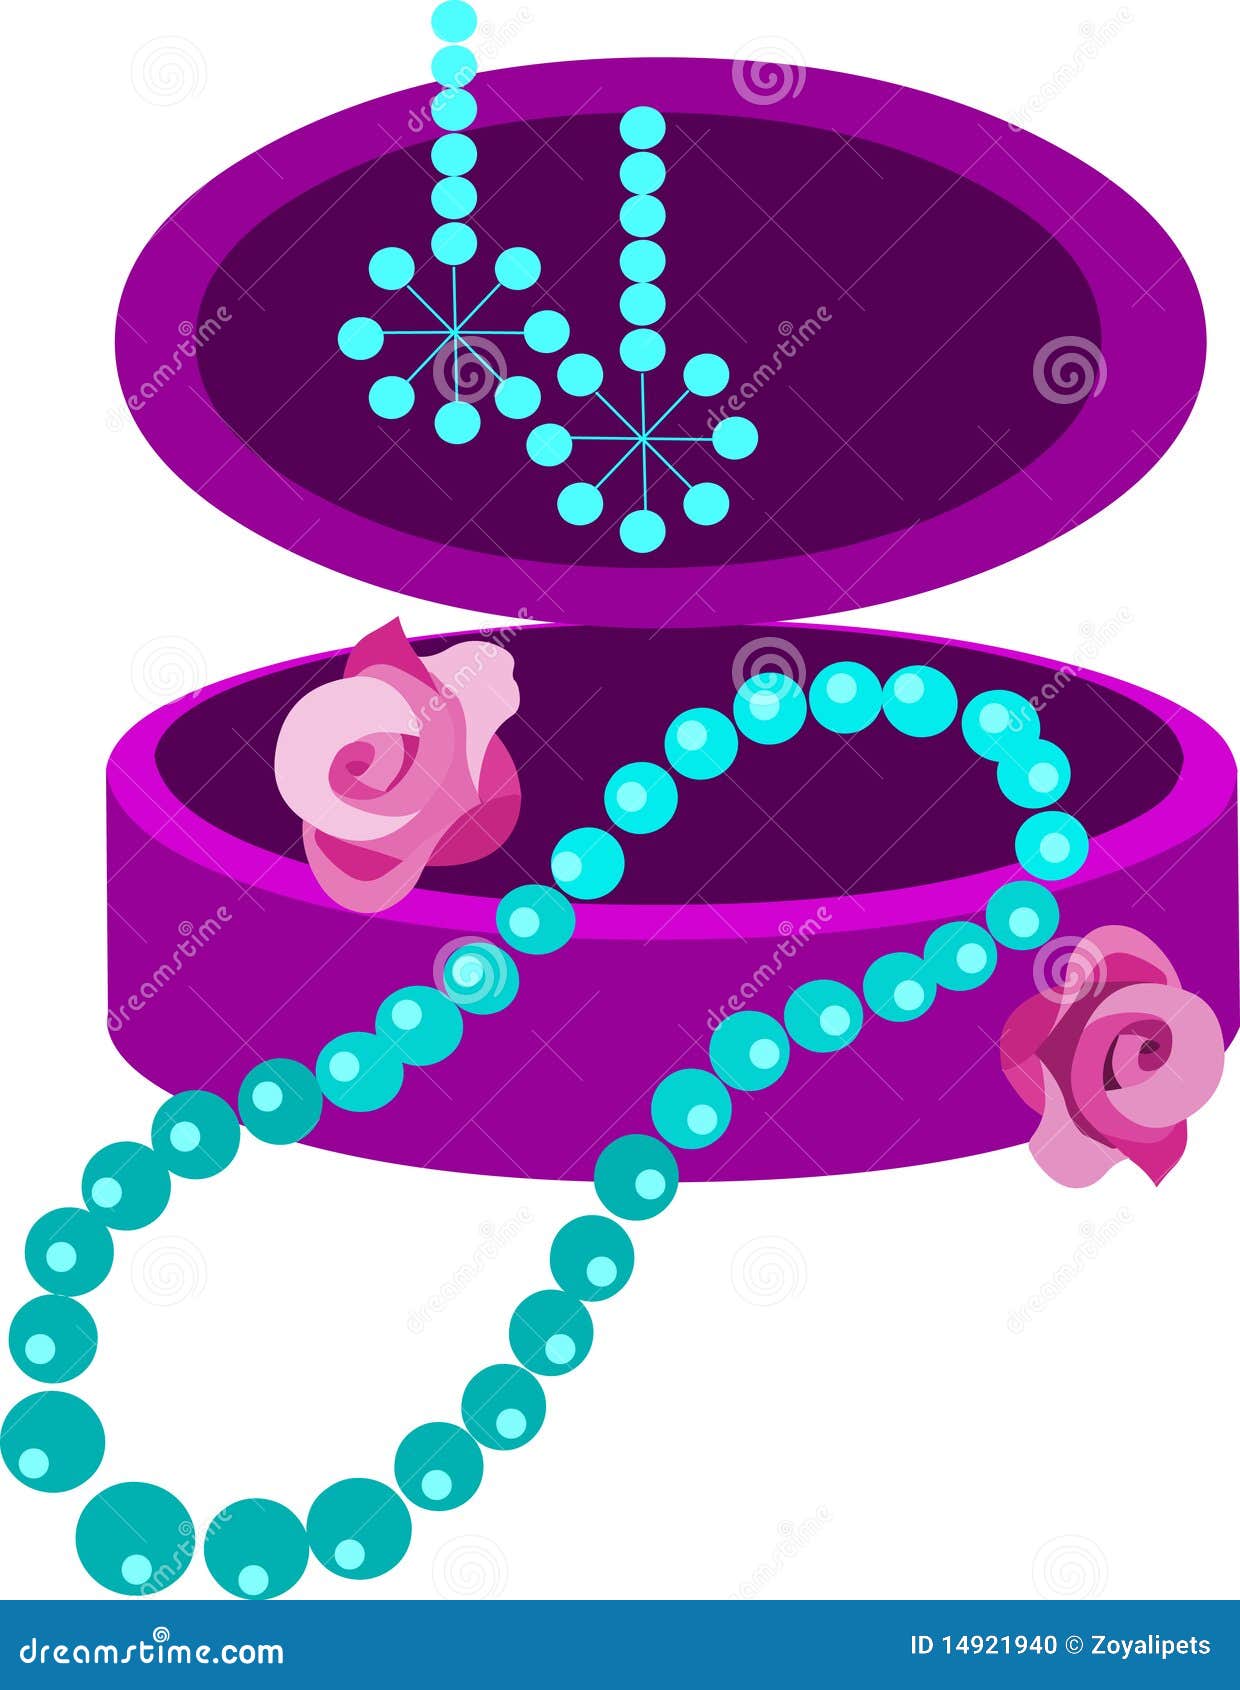 jewelery box with earring, necklace and flowers